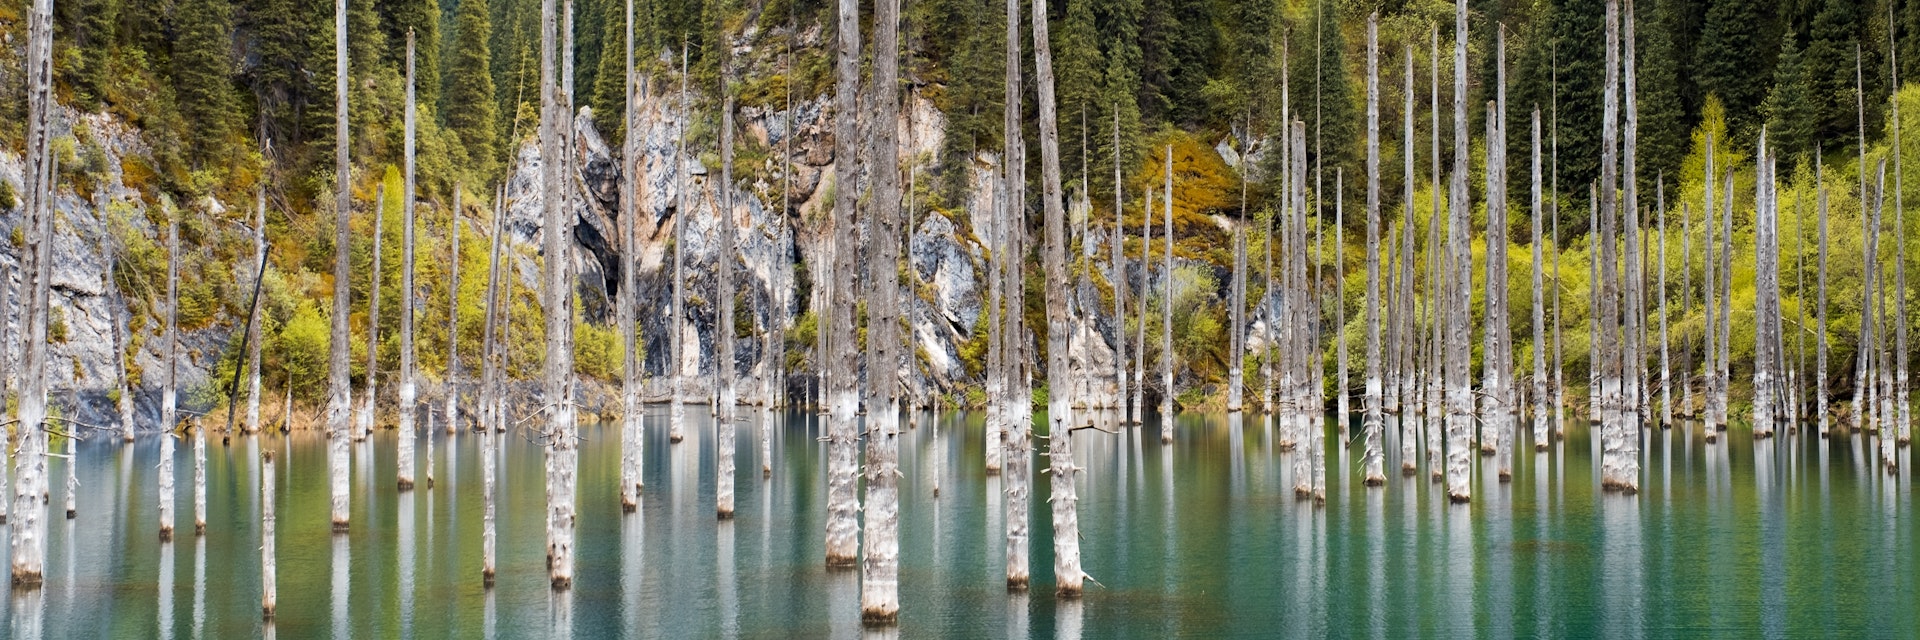 Dead submerged trees in the Kaindy (Kaiyndy) lake in South East Kazakhstan. 